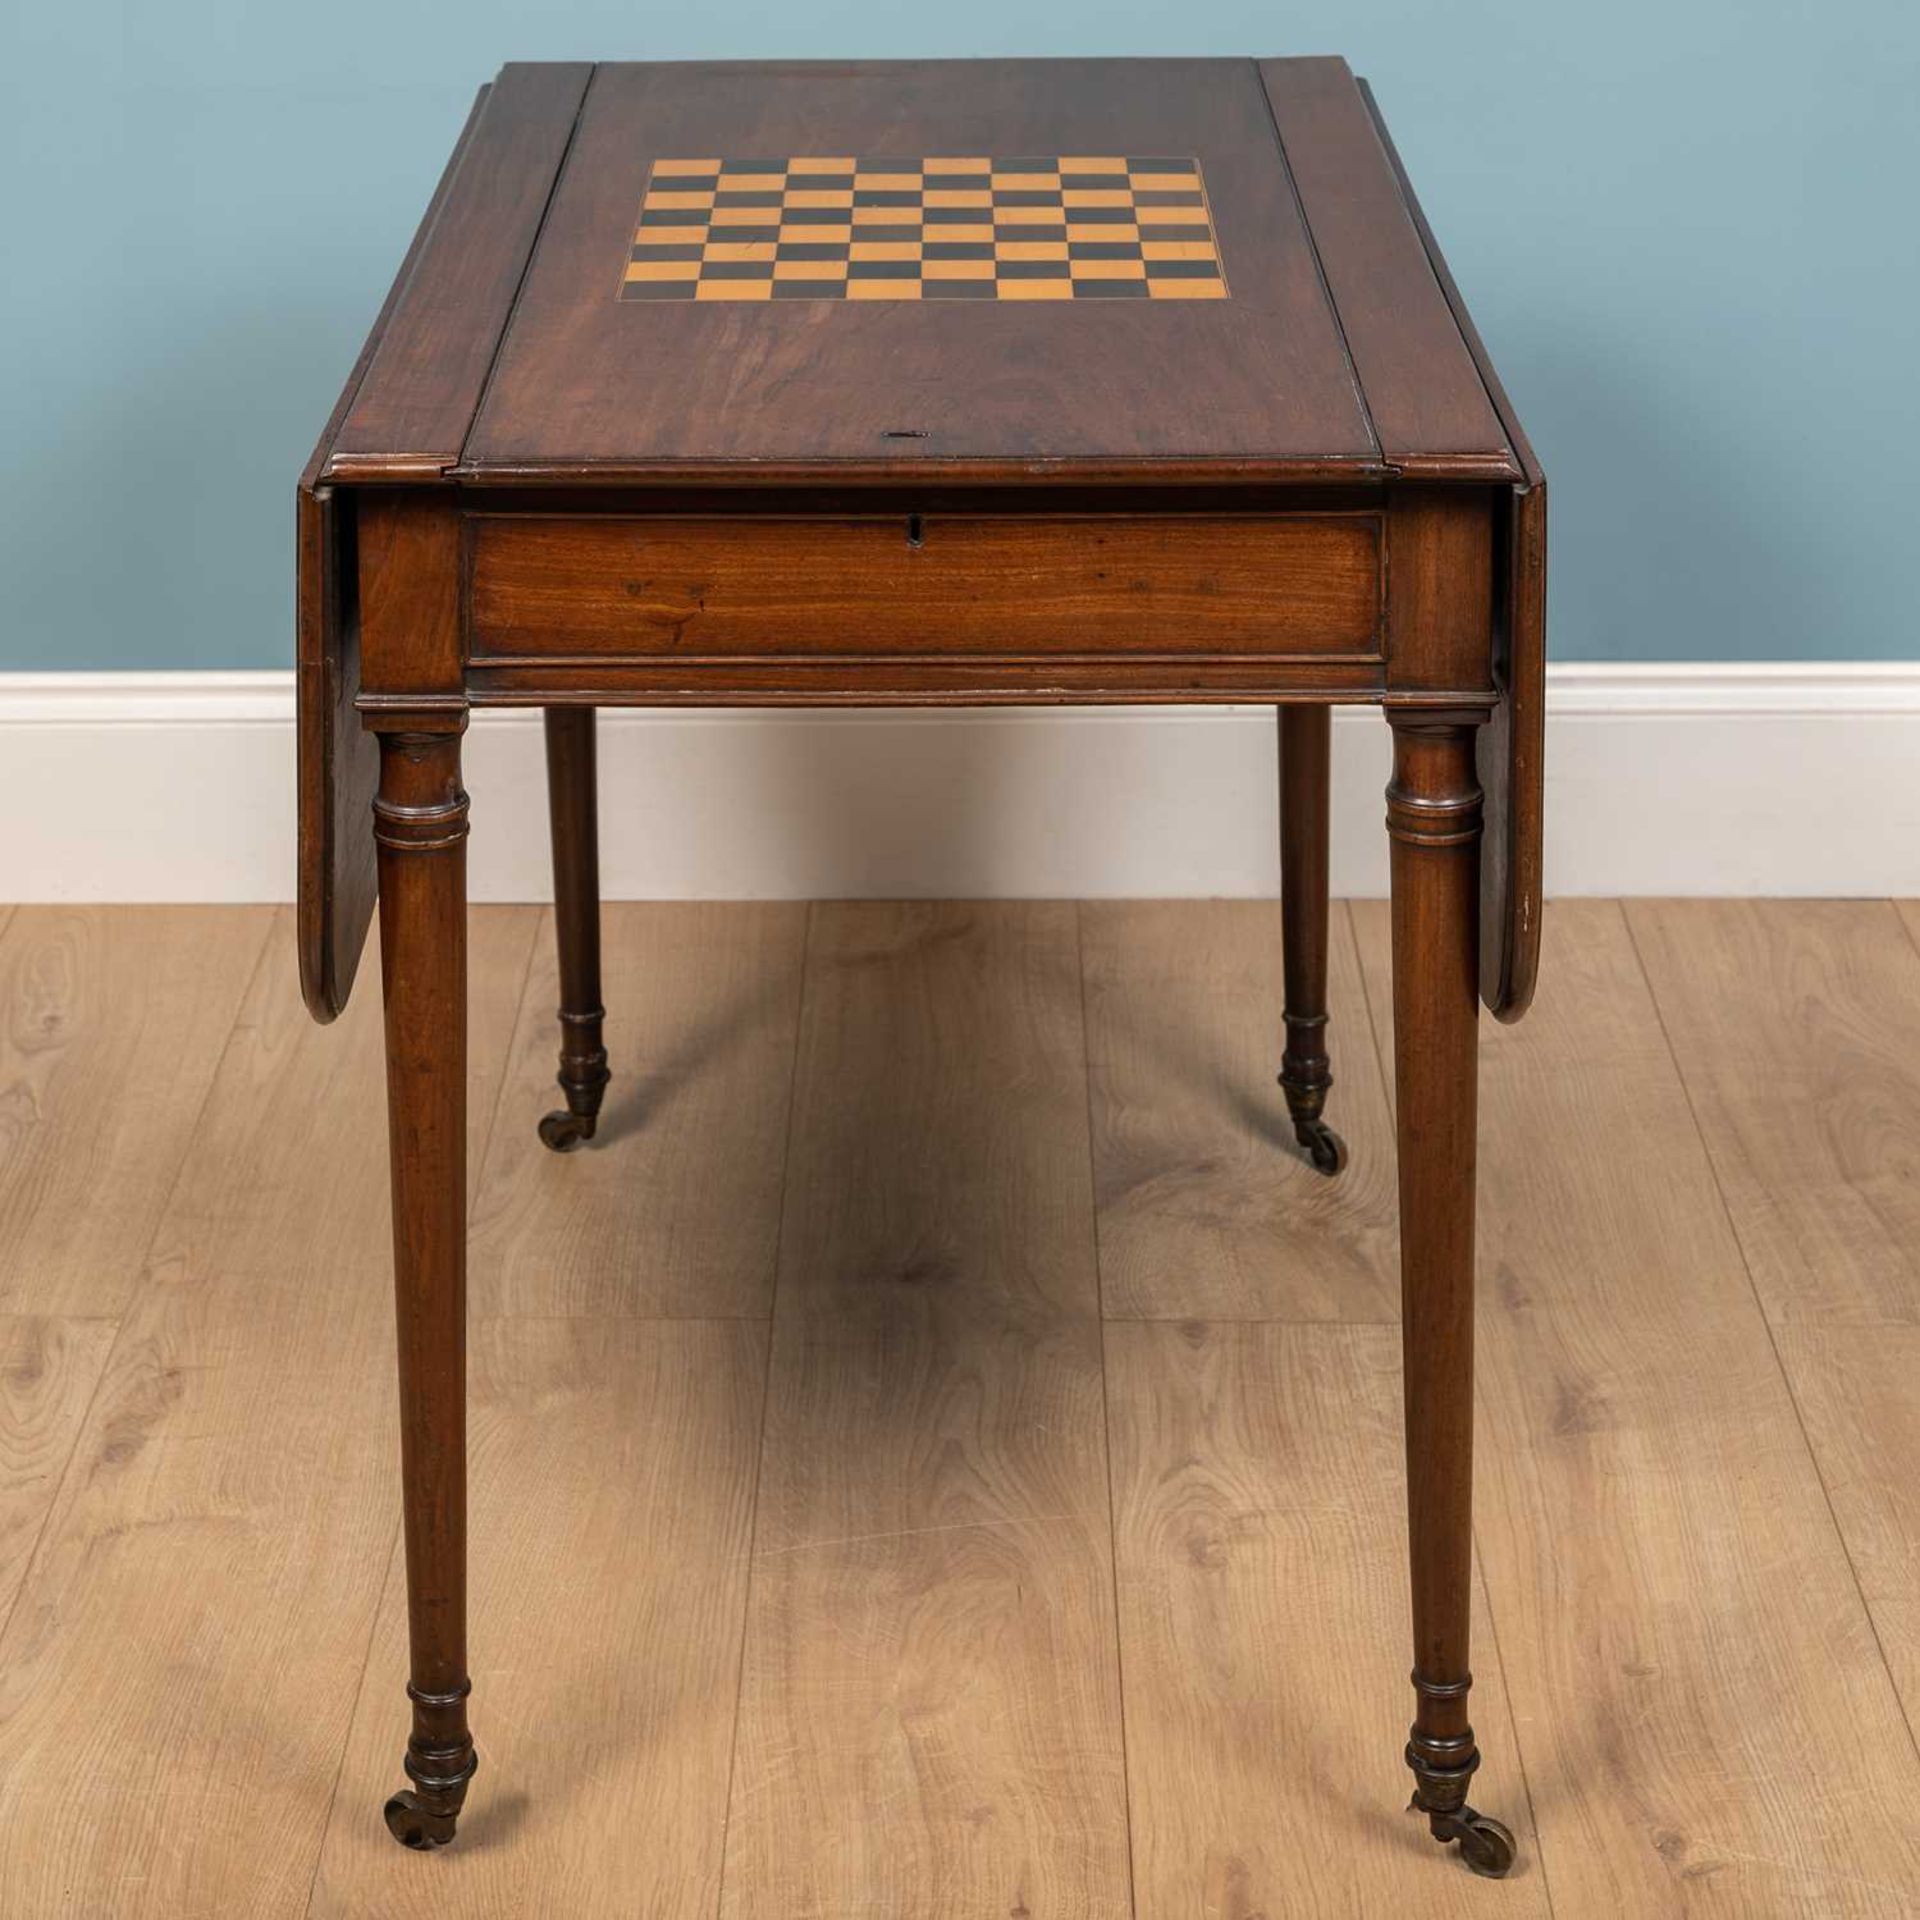 A George III mahogany games table with drop leaves - Image 6 of 9